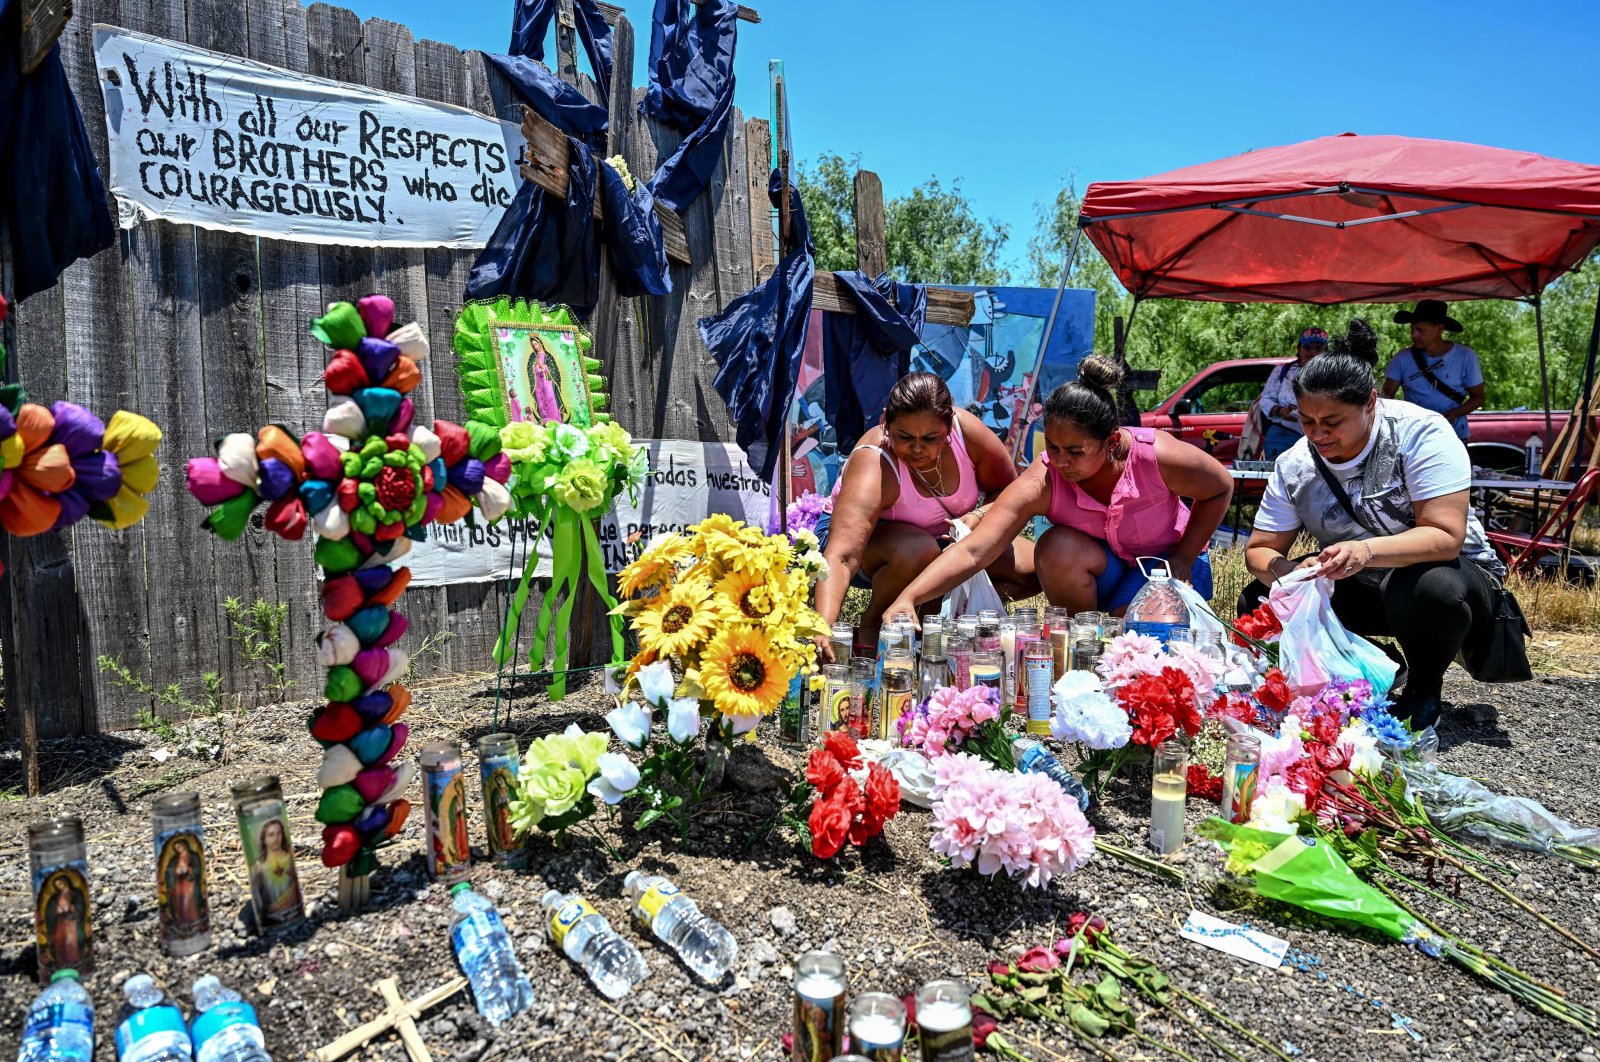 People place flowers and candles at a makeshift memorial where a tractor-trailer was discovered with migrants inside, outside San Antonio, Texas, U.S., June 29, 2022. (AFP Photo)